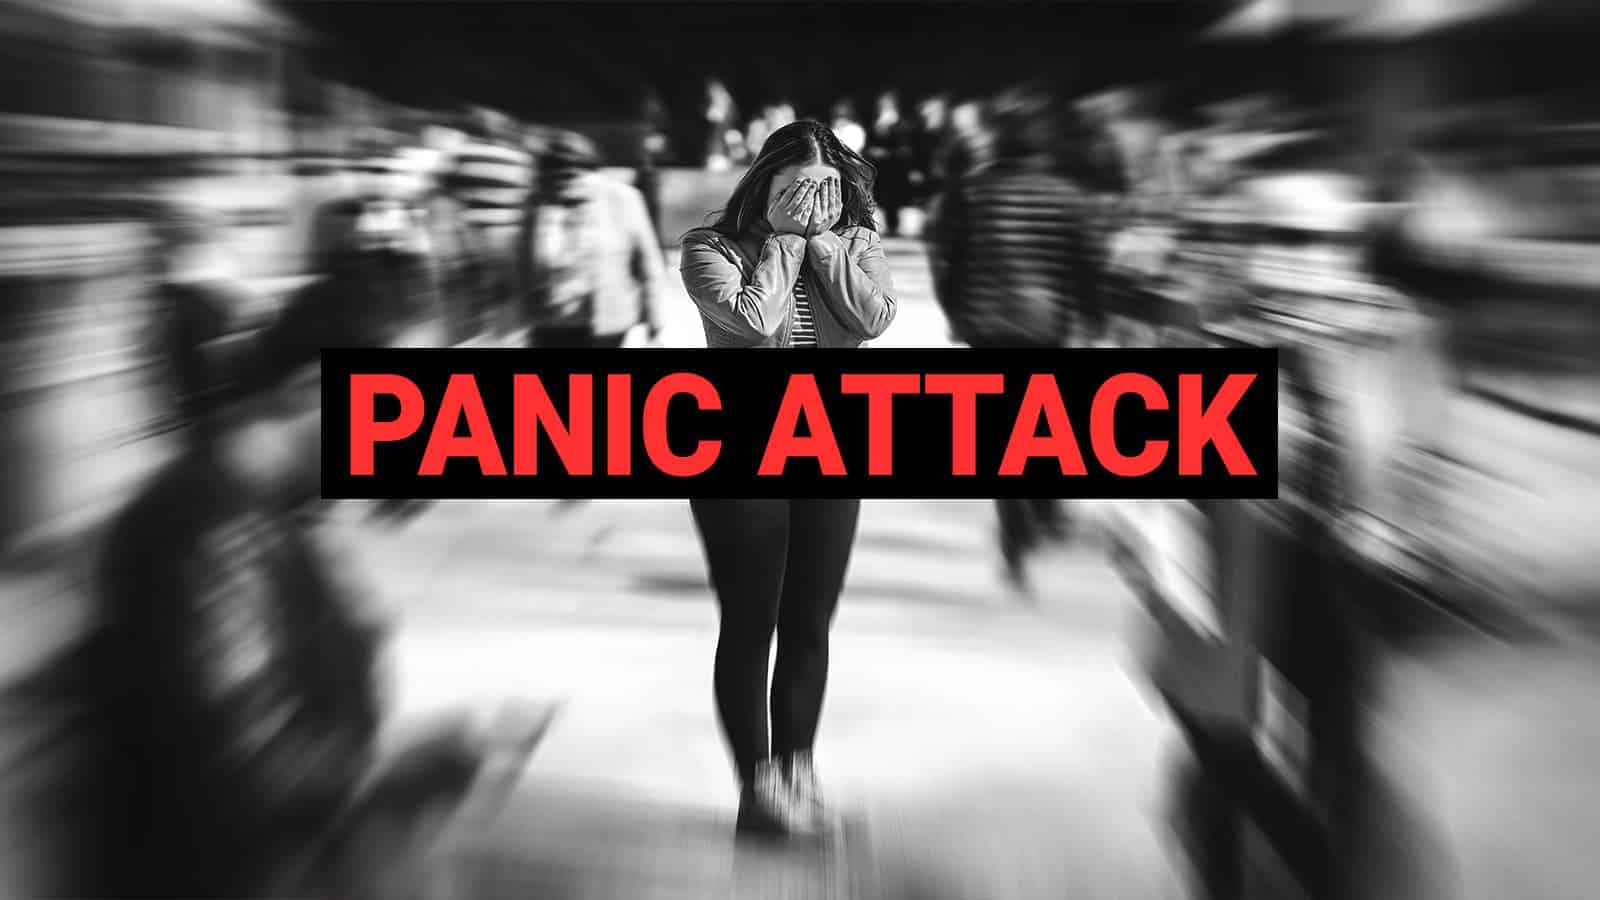 Science Explains 10 Ways to Stop A Panic Attack Before It Happens